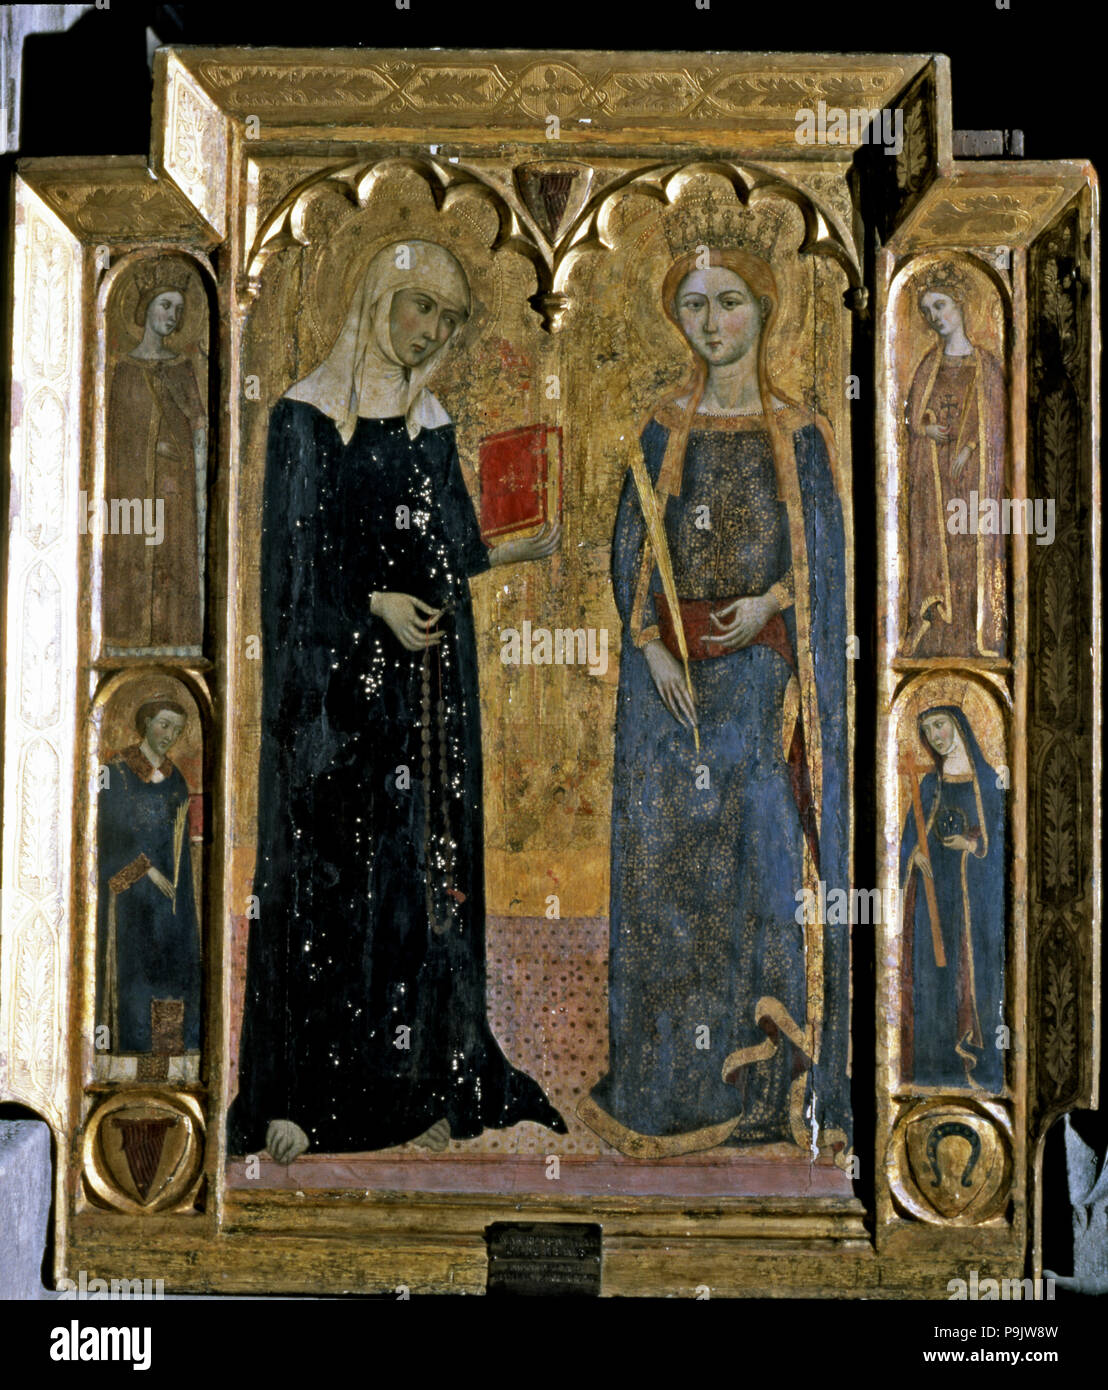 Central table of an altarpiece with Saint Martha and Saint Margaret, c. 1360. Stock Photo